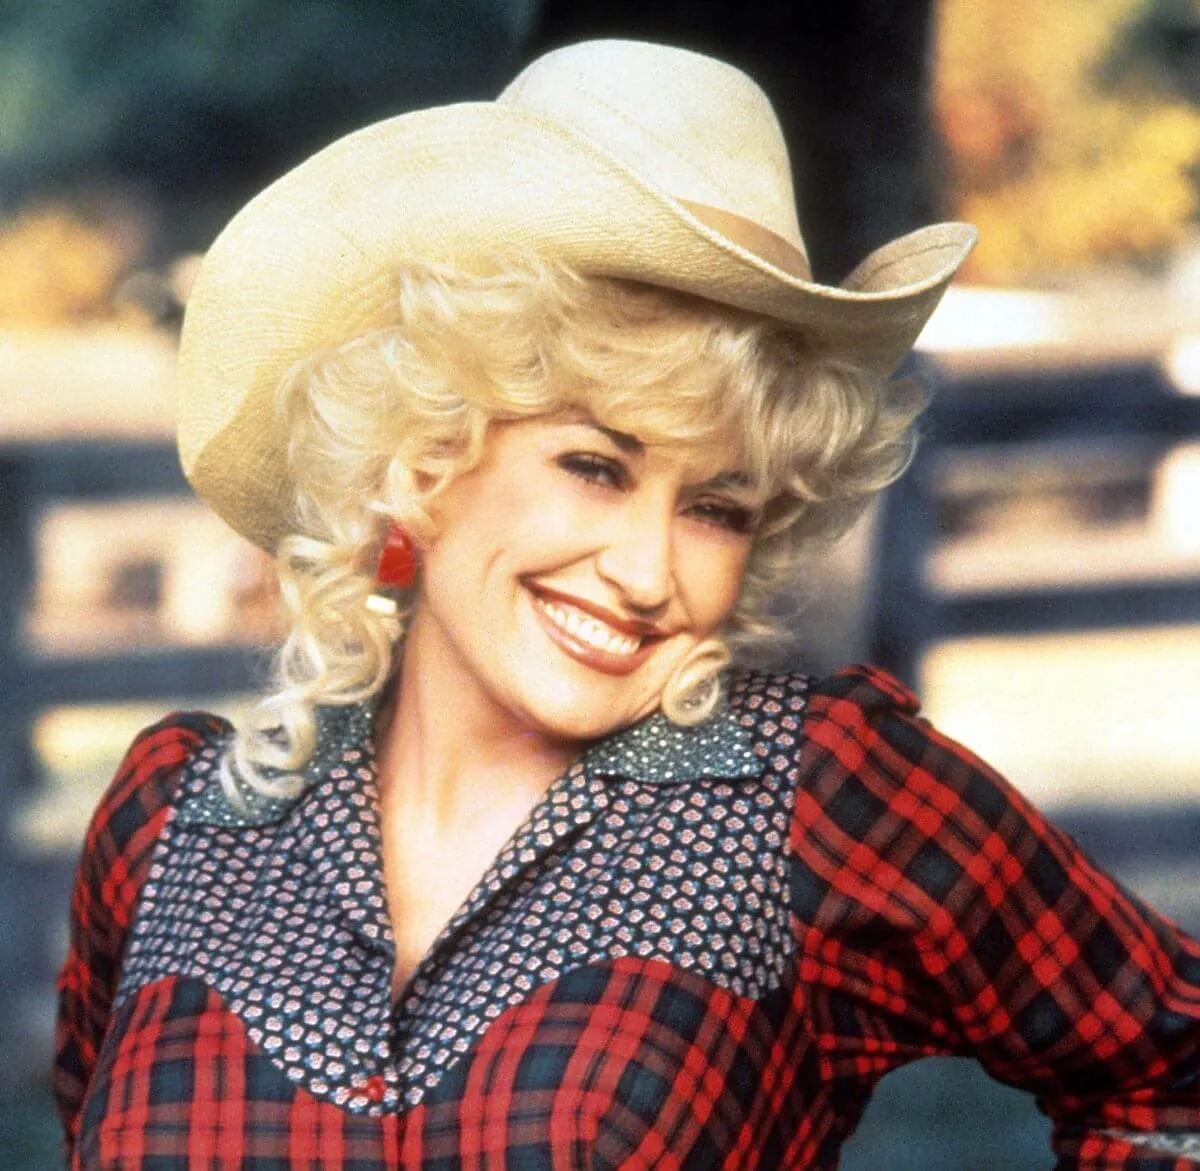 Dolly Parton wears a plaid shirt and a cowboy hat.